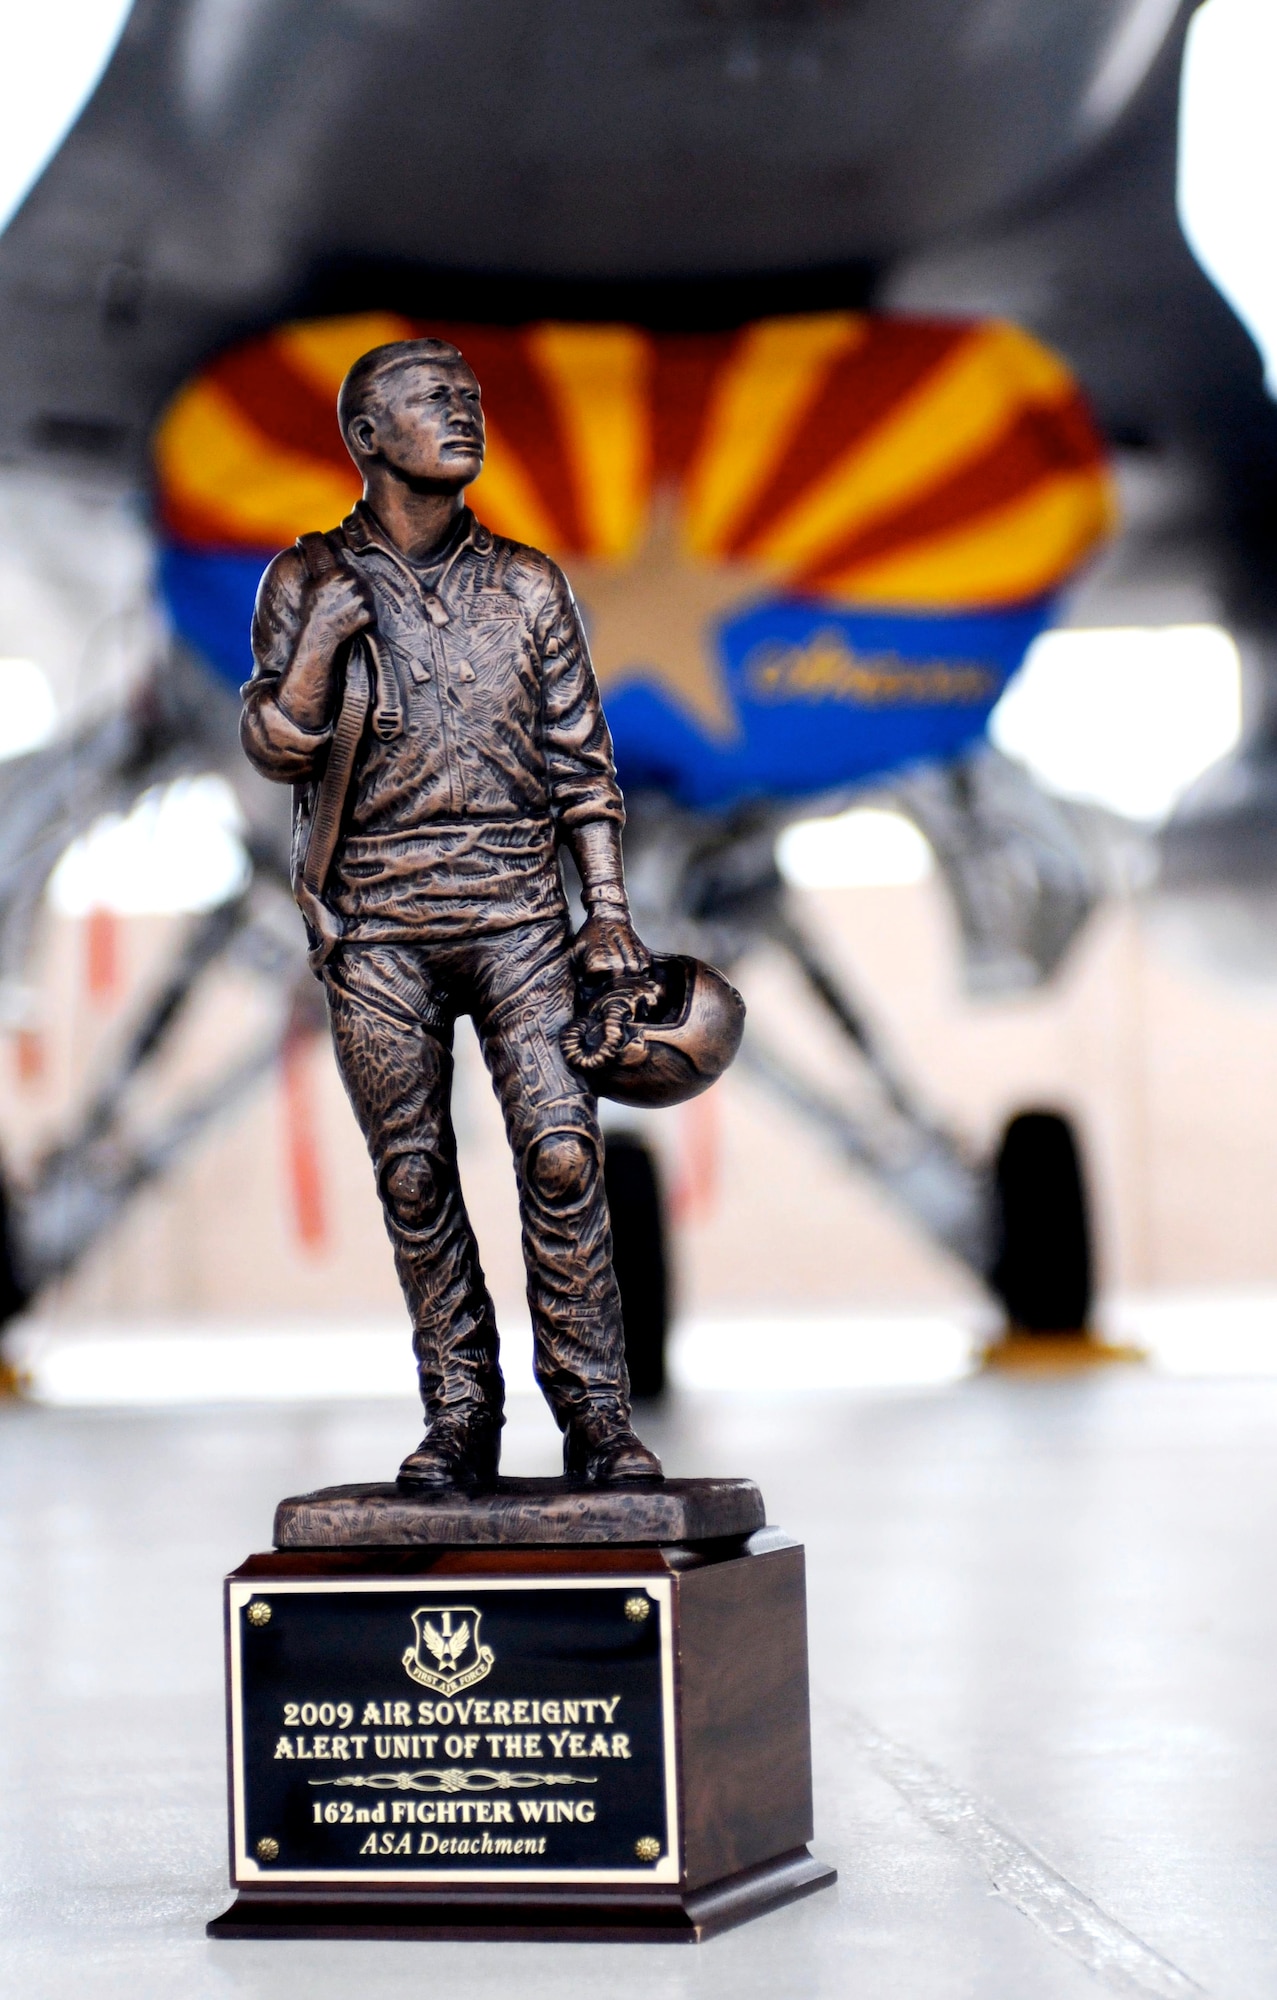 First Air Force, Air Forces Northern, awarded the 2009 Air Sovereignty Alert Unit of the Year award to the Arizona Air National Guard’s 162nd Fighter Wing Alert Detachment, an F-16 unit based at Davis-Monthan Air Force Base, April 13. (Air Force photo by Maj. Gabe Johnson)